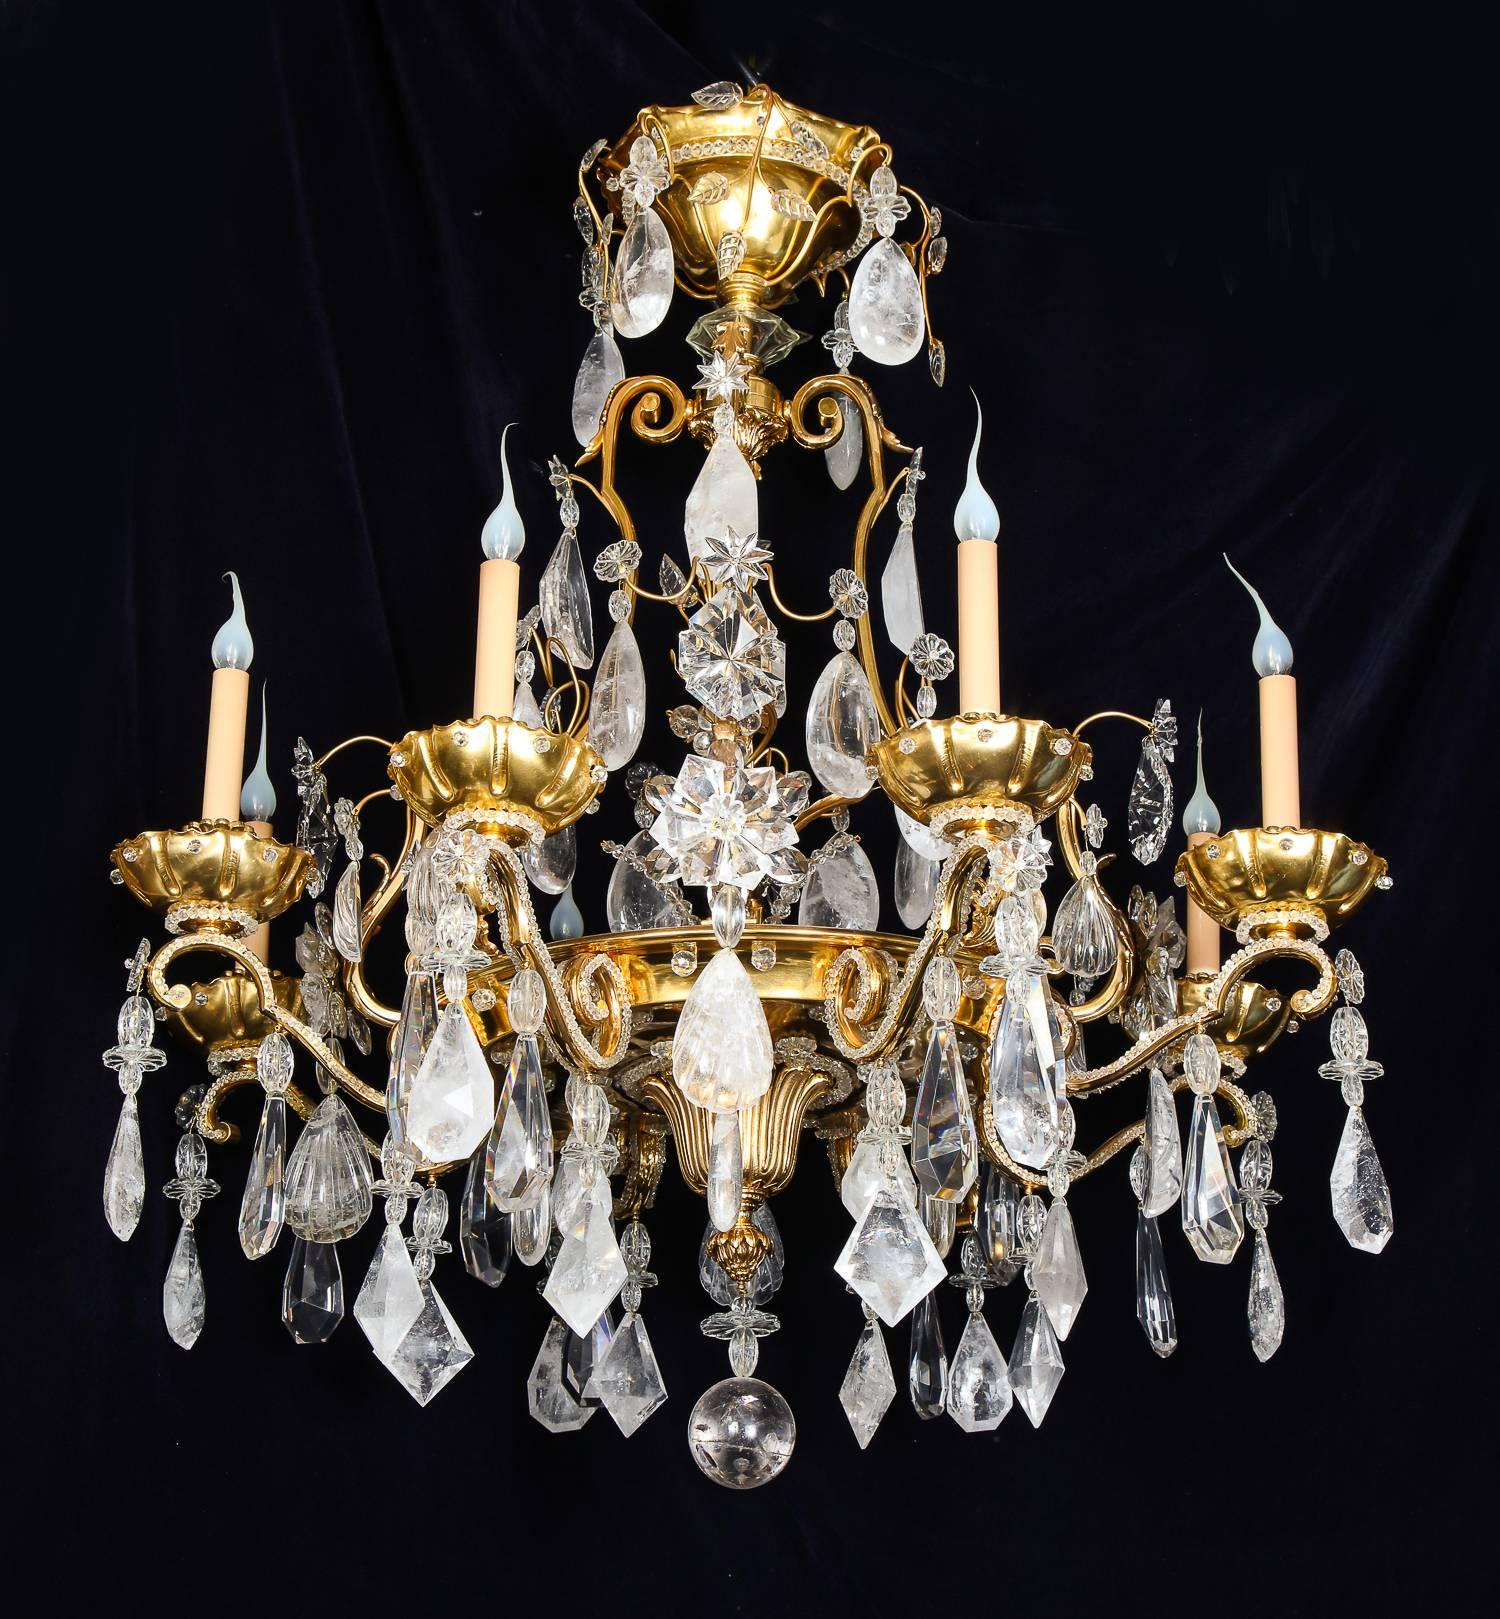 A pair of large and spectacular antique French Baguès Louis XVI style gilt bronze, cut rock crystal, crystal and beaded glass multi light chandeliers of superb craftsmanship embellished with fine cut rock crystal prisms, rock crystal flowers,